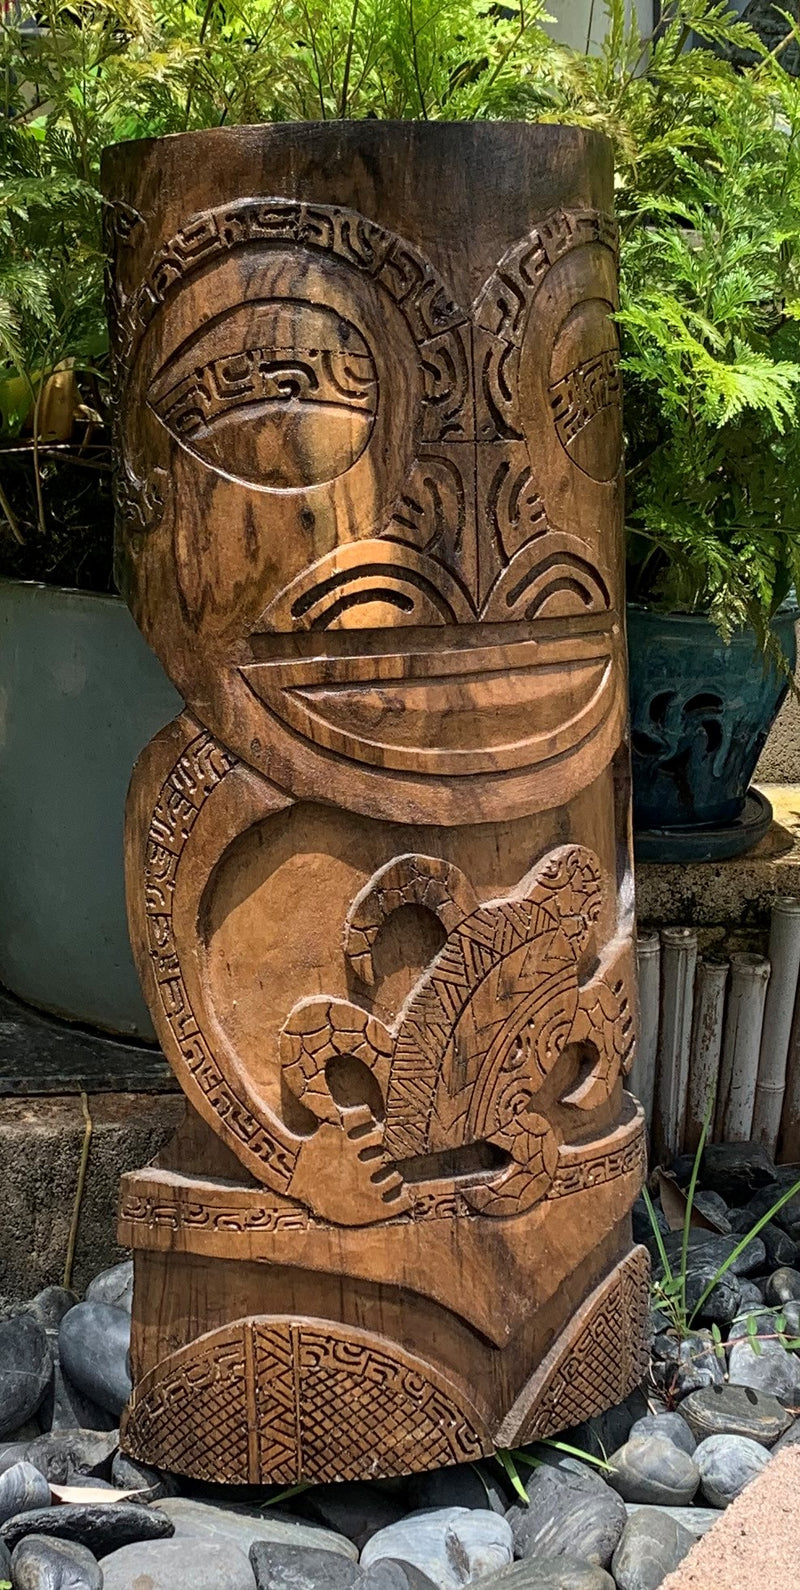 Tiki - Voyager Protector with a Honu (turtle)